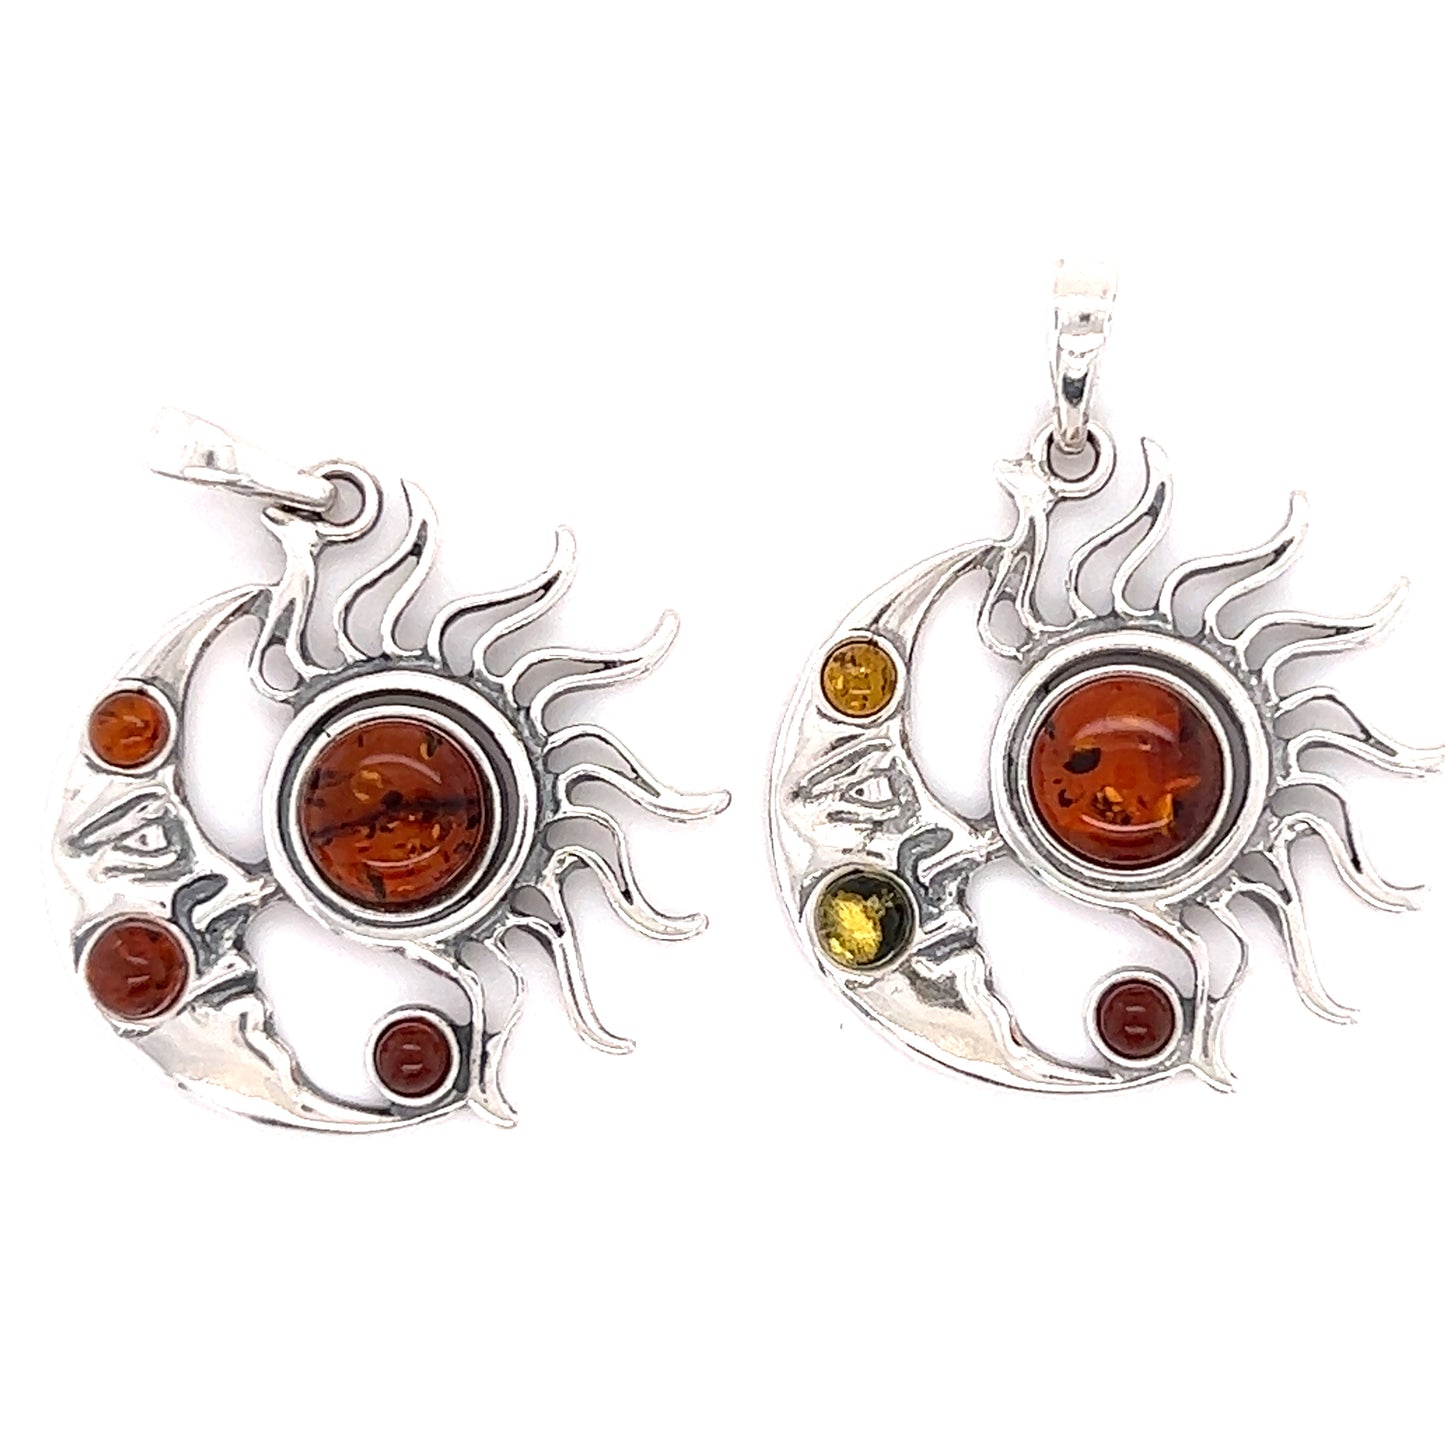 A pair of Magical Sun and Moon Amber Pendant earrings by Super Silver, featuring healing properties.